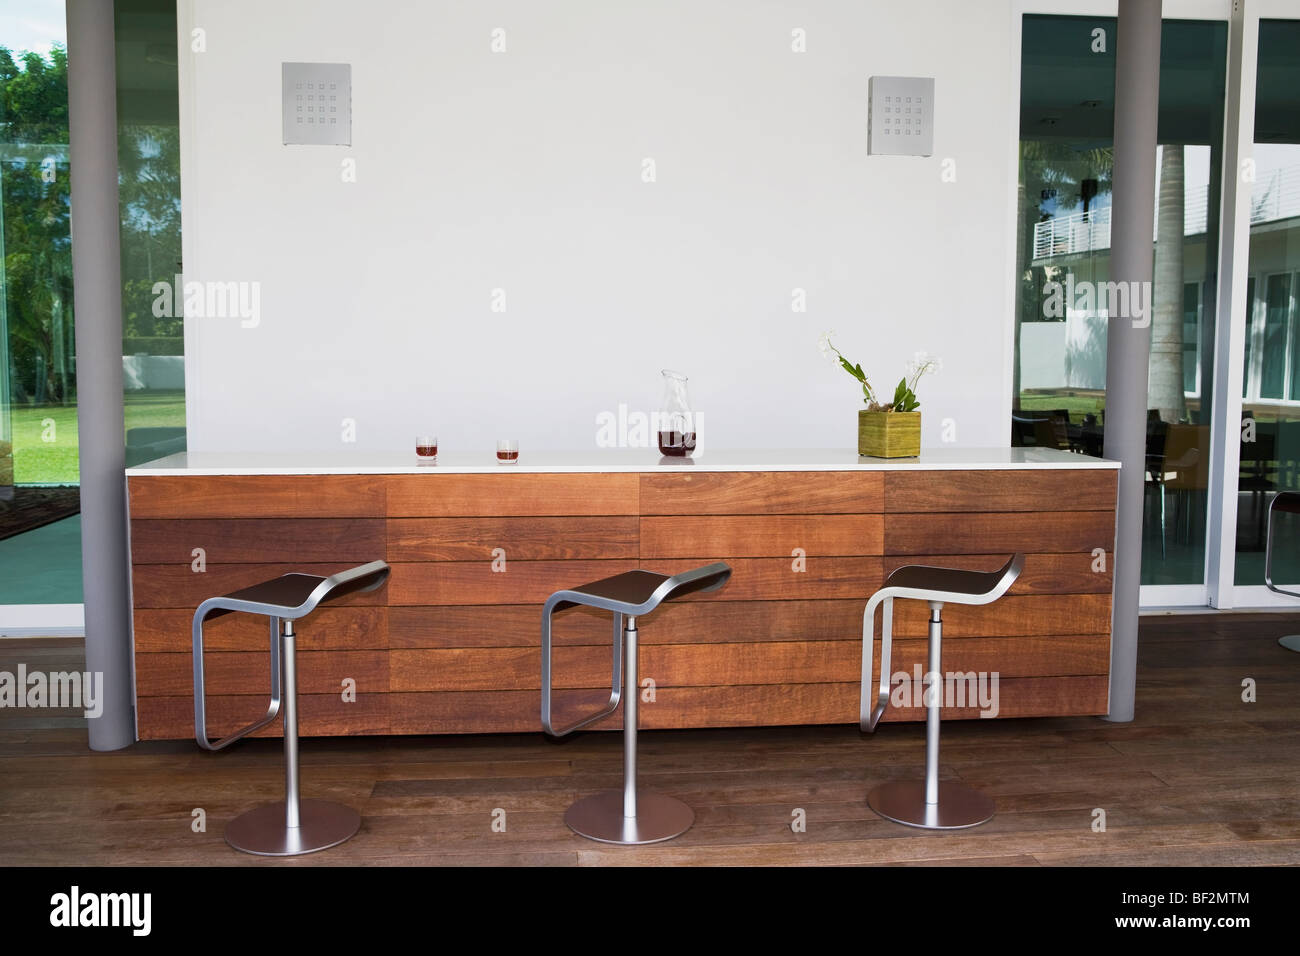 Stools in a row at a bar counter Stock Photo